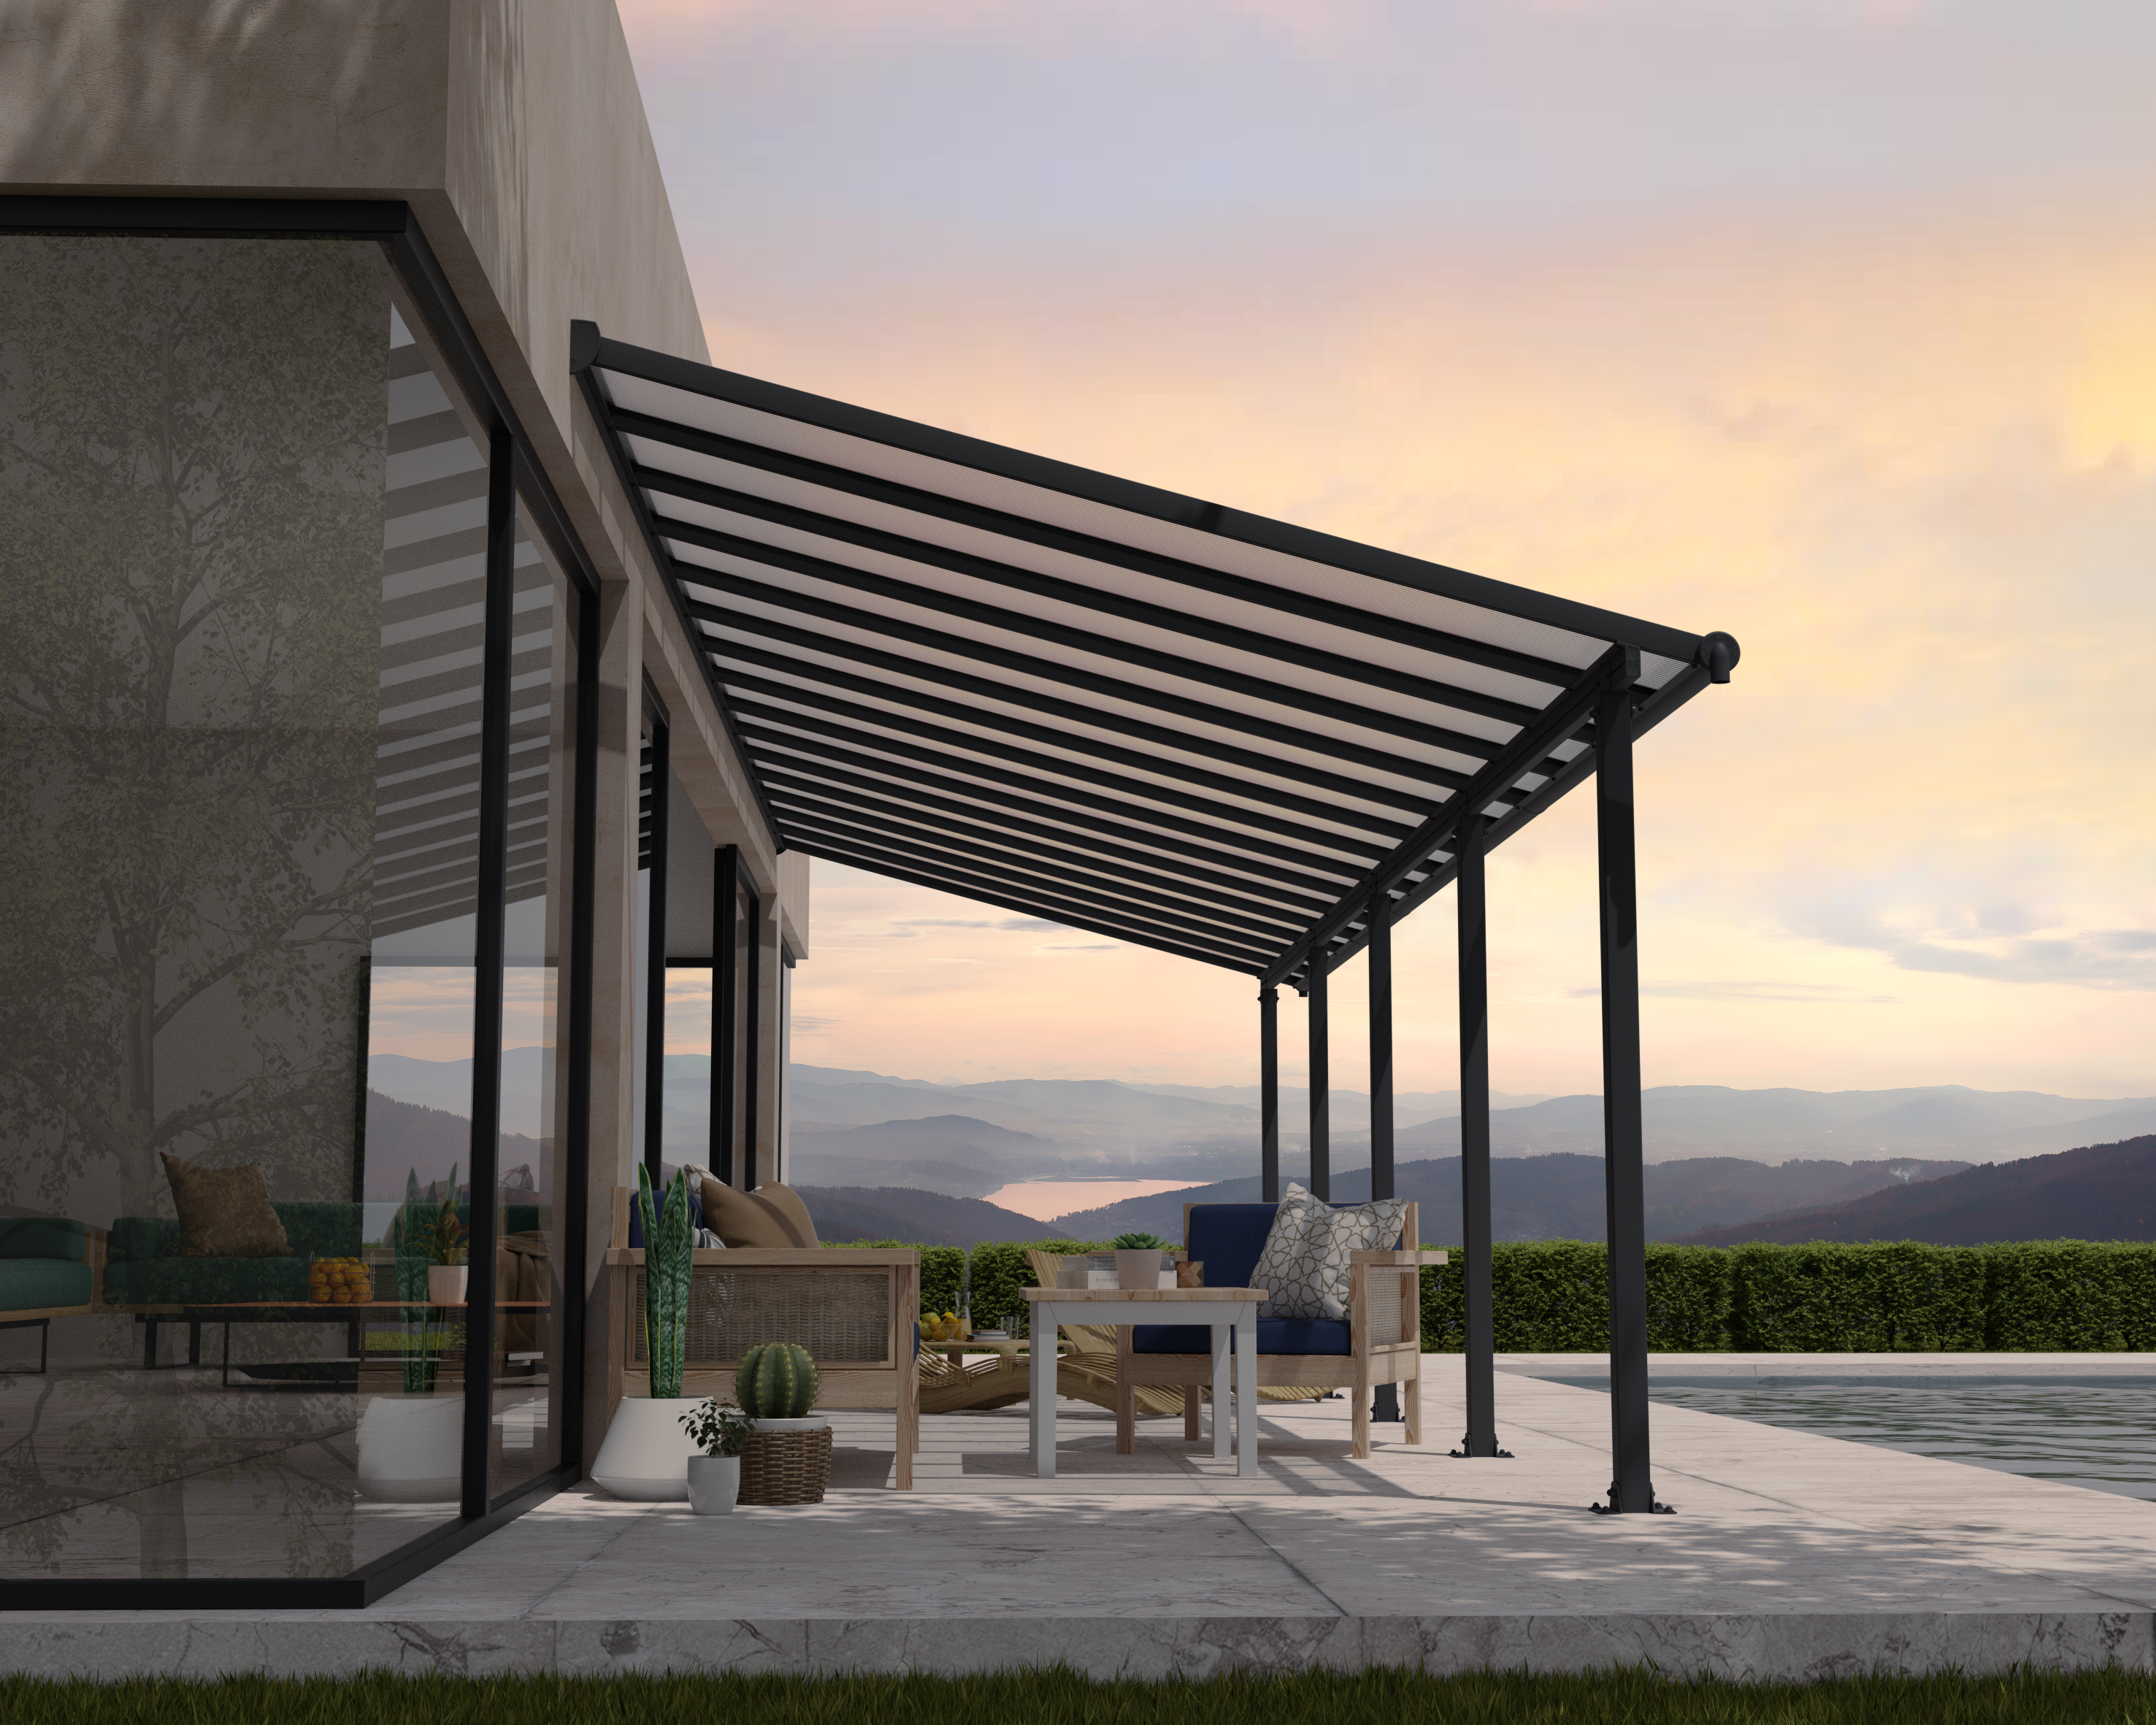 Olympia by Blackwood patio cover